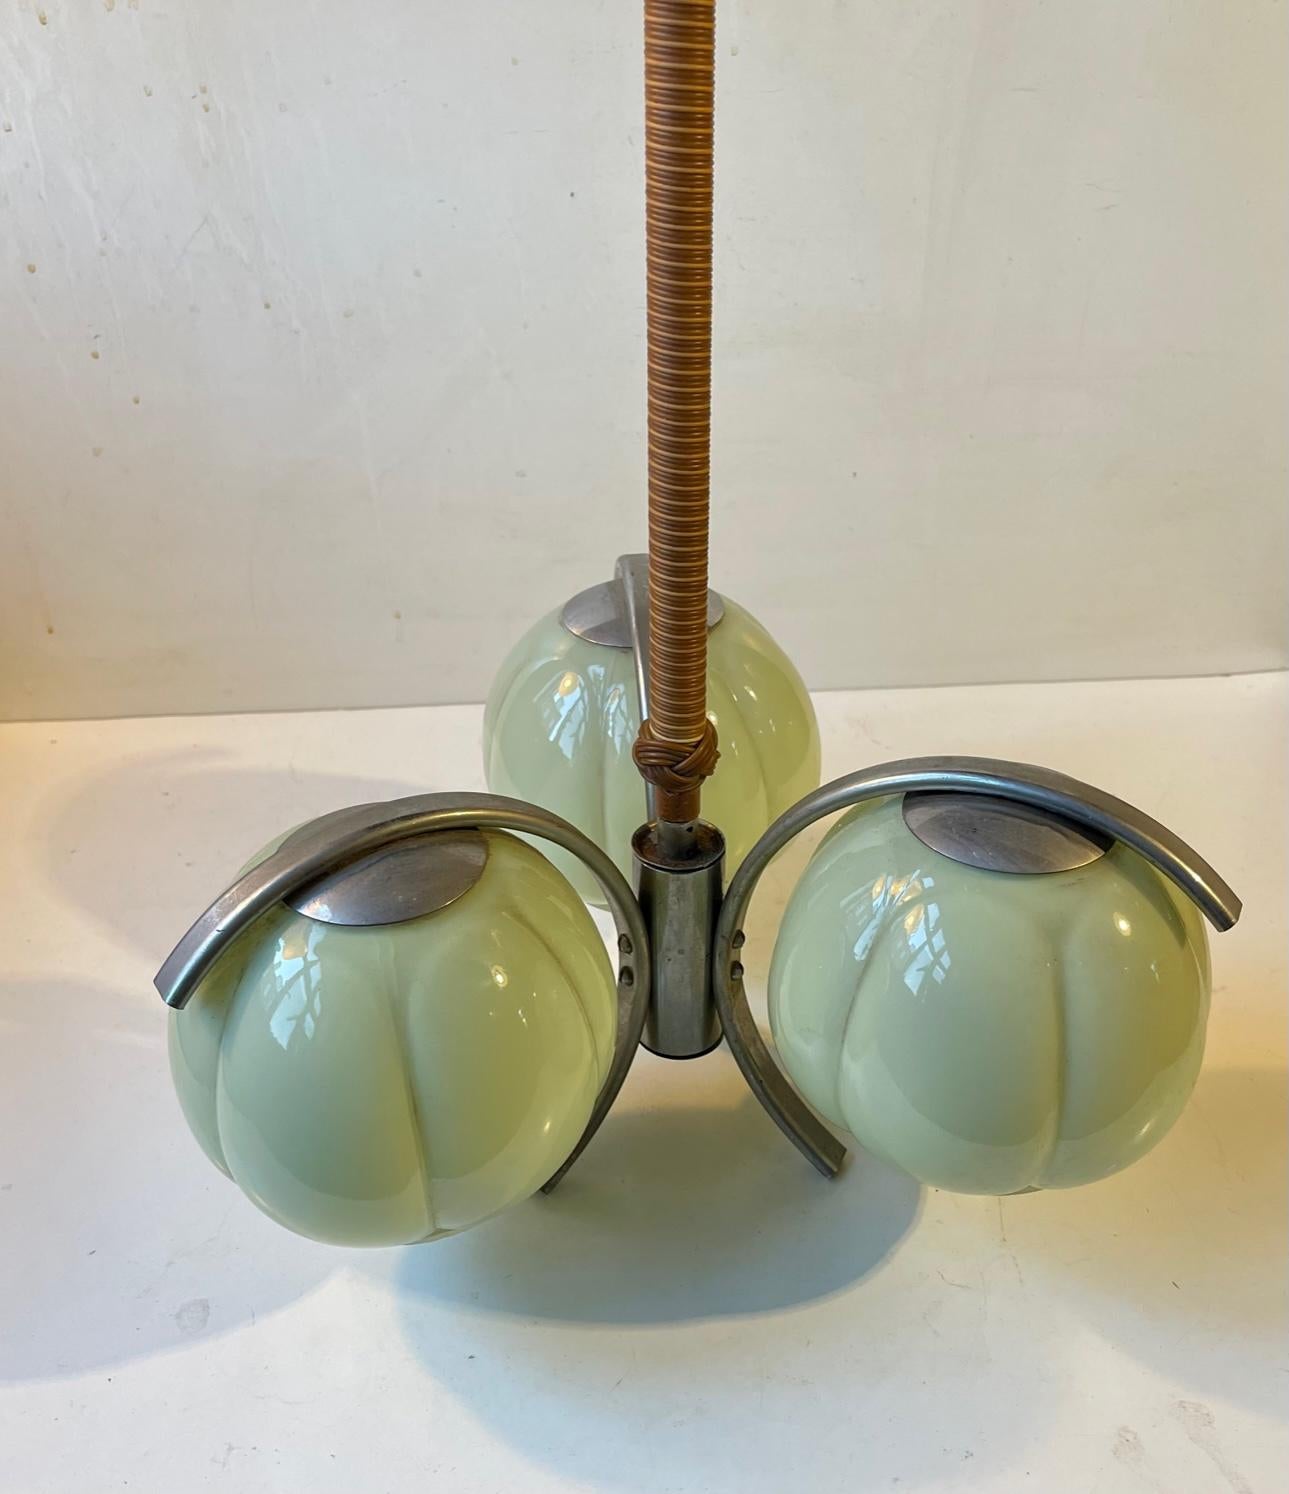 3-Armed Bauhaus Ceiling Light with Light Green Shades, Germany, 1930s For Sale 1